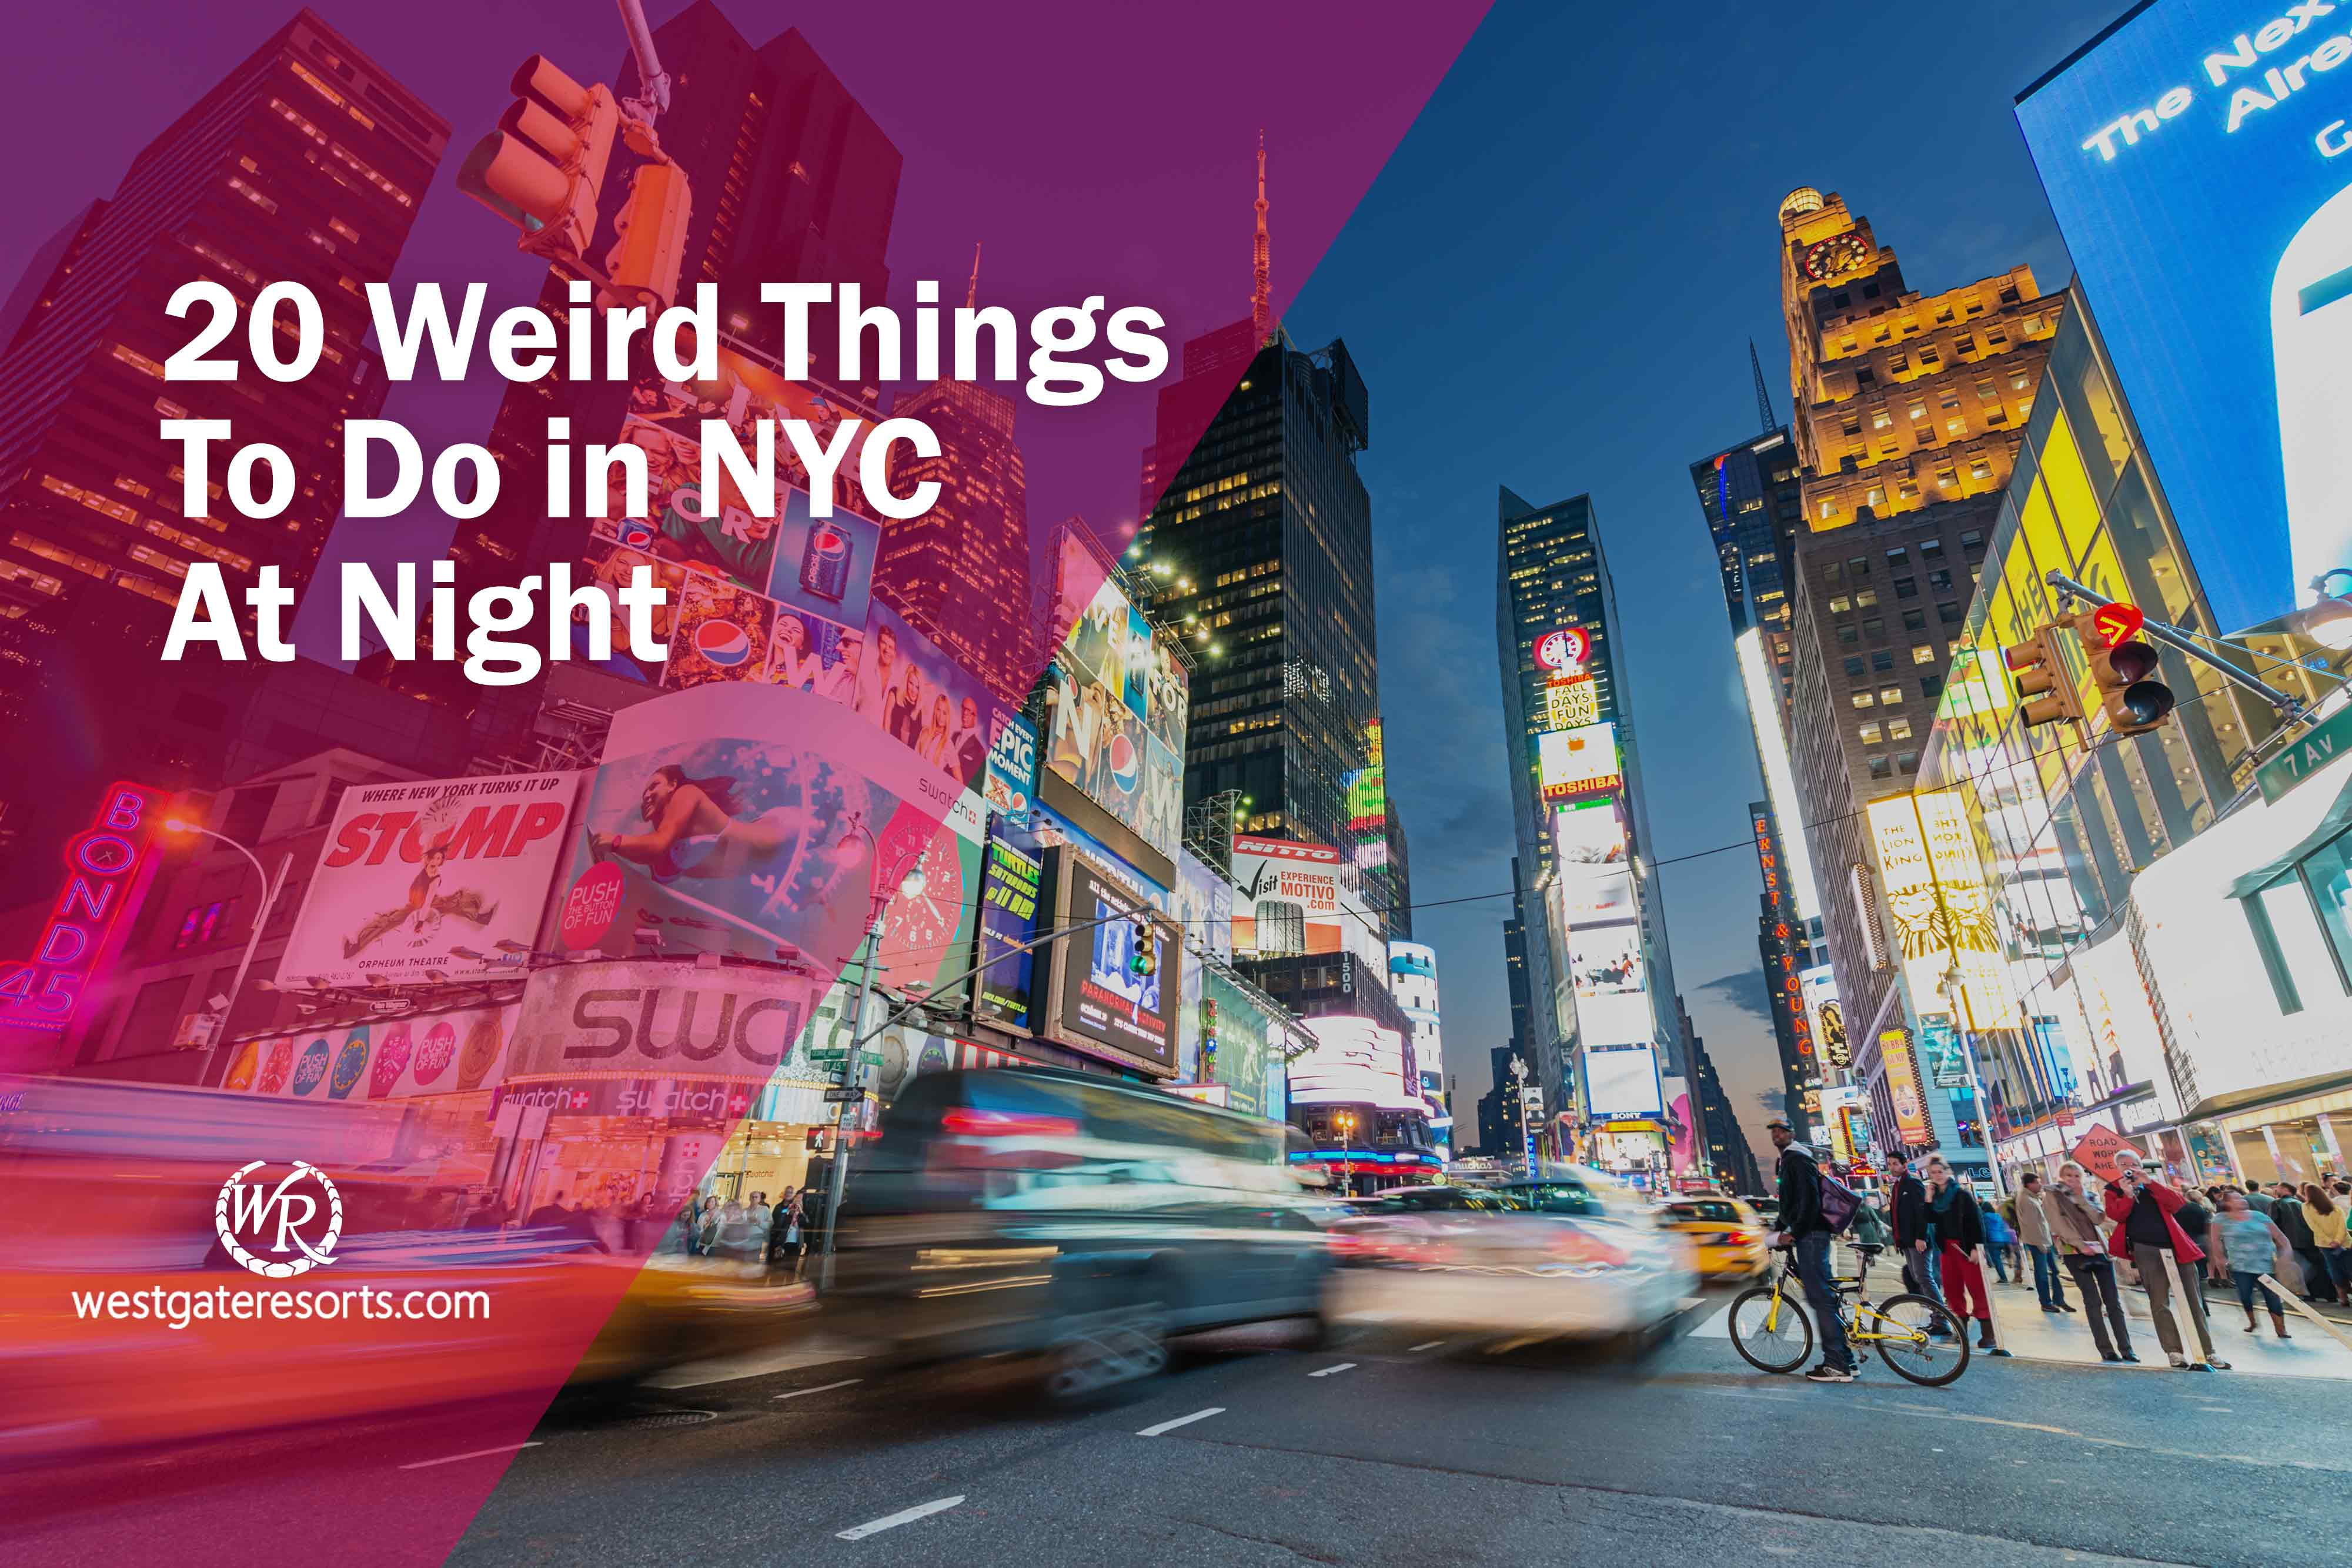 20 Weird Things To Do in NYC At Night! | Things To Do In NYC